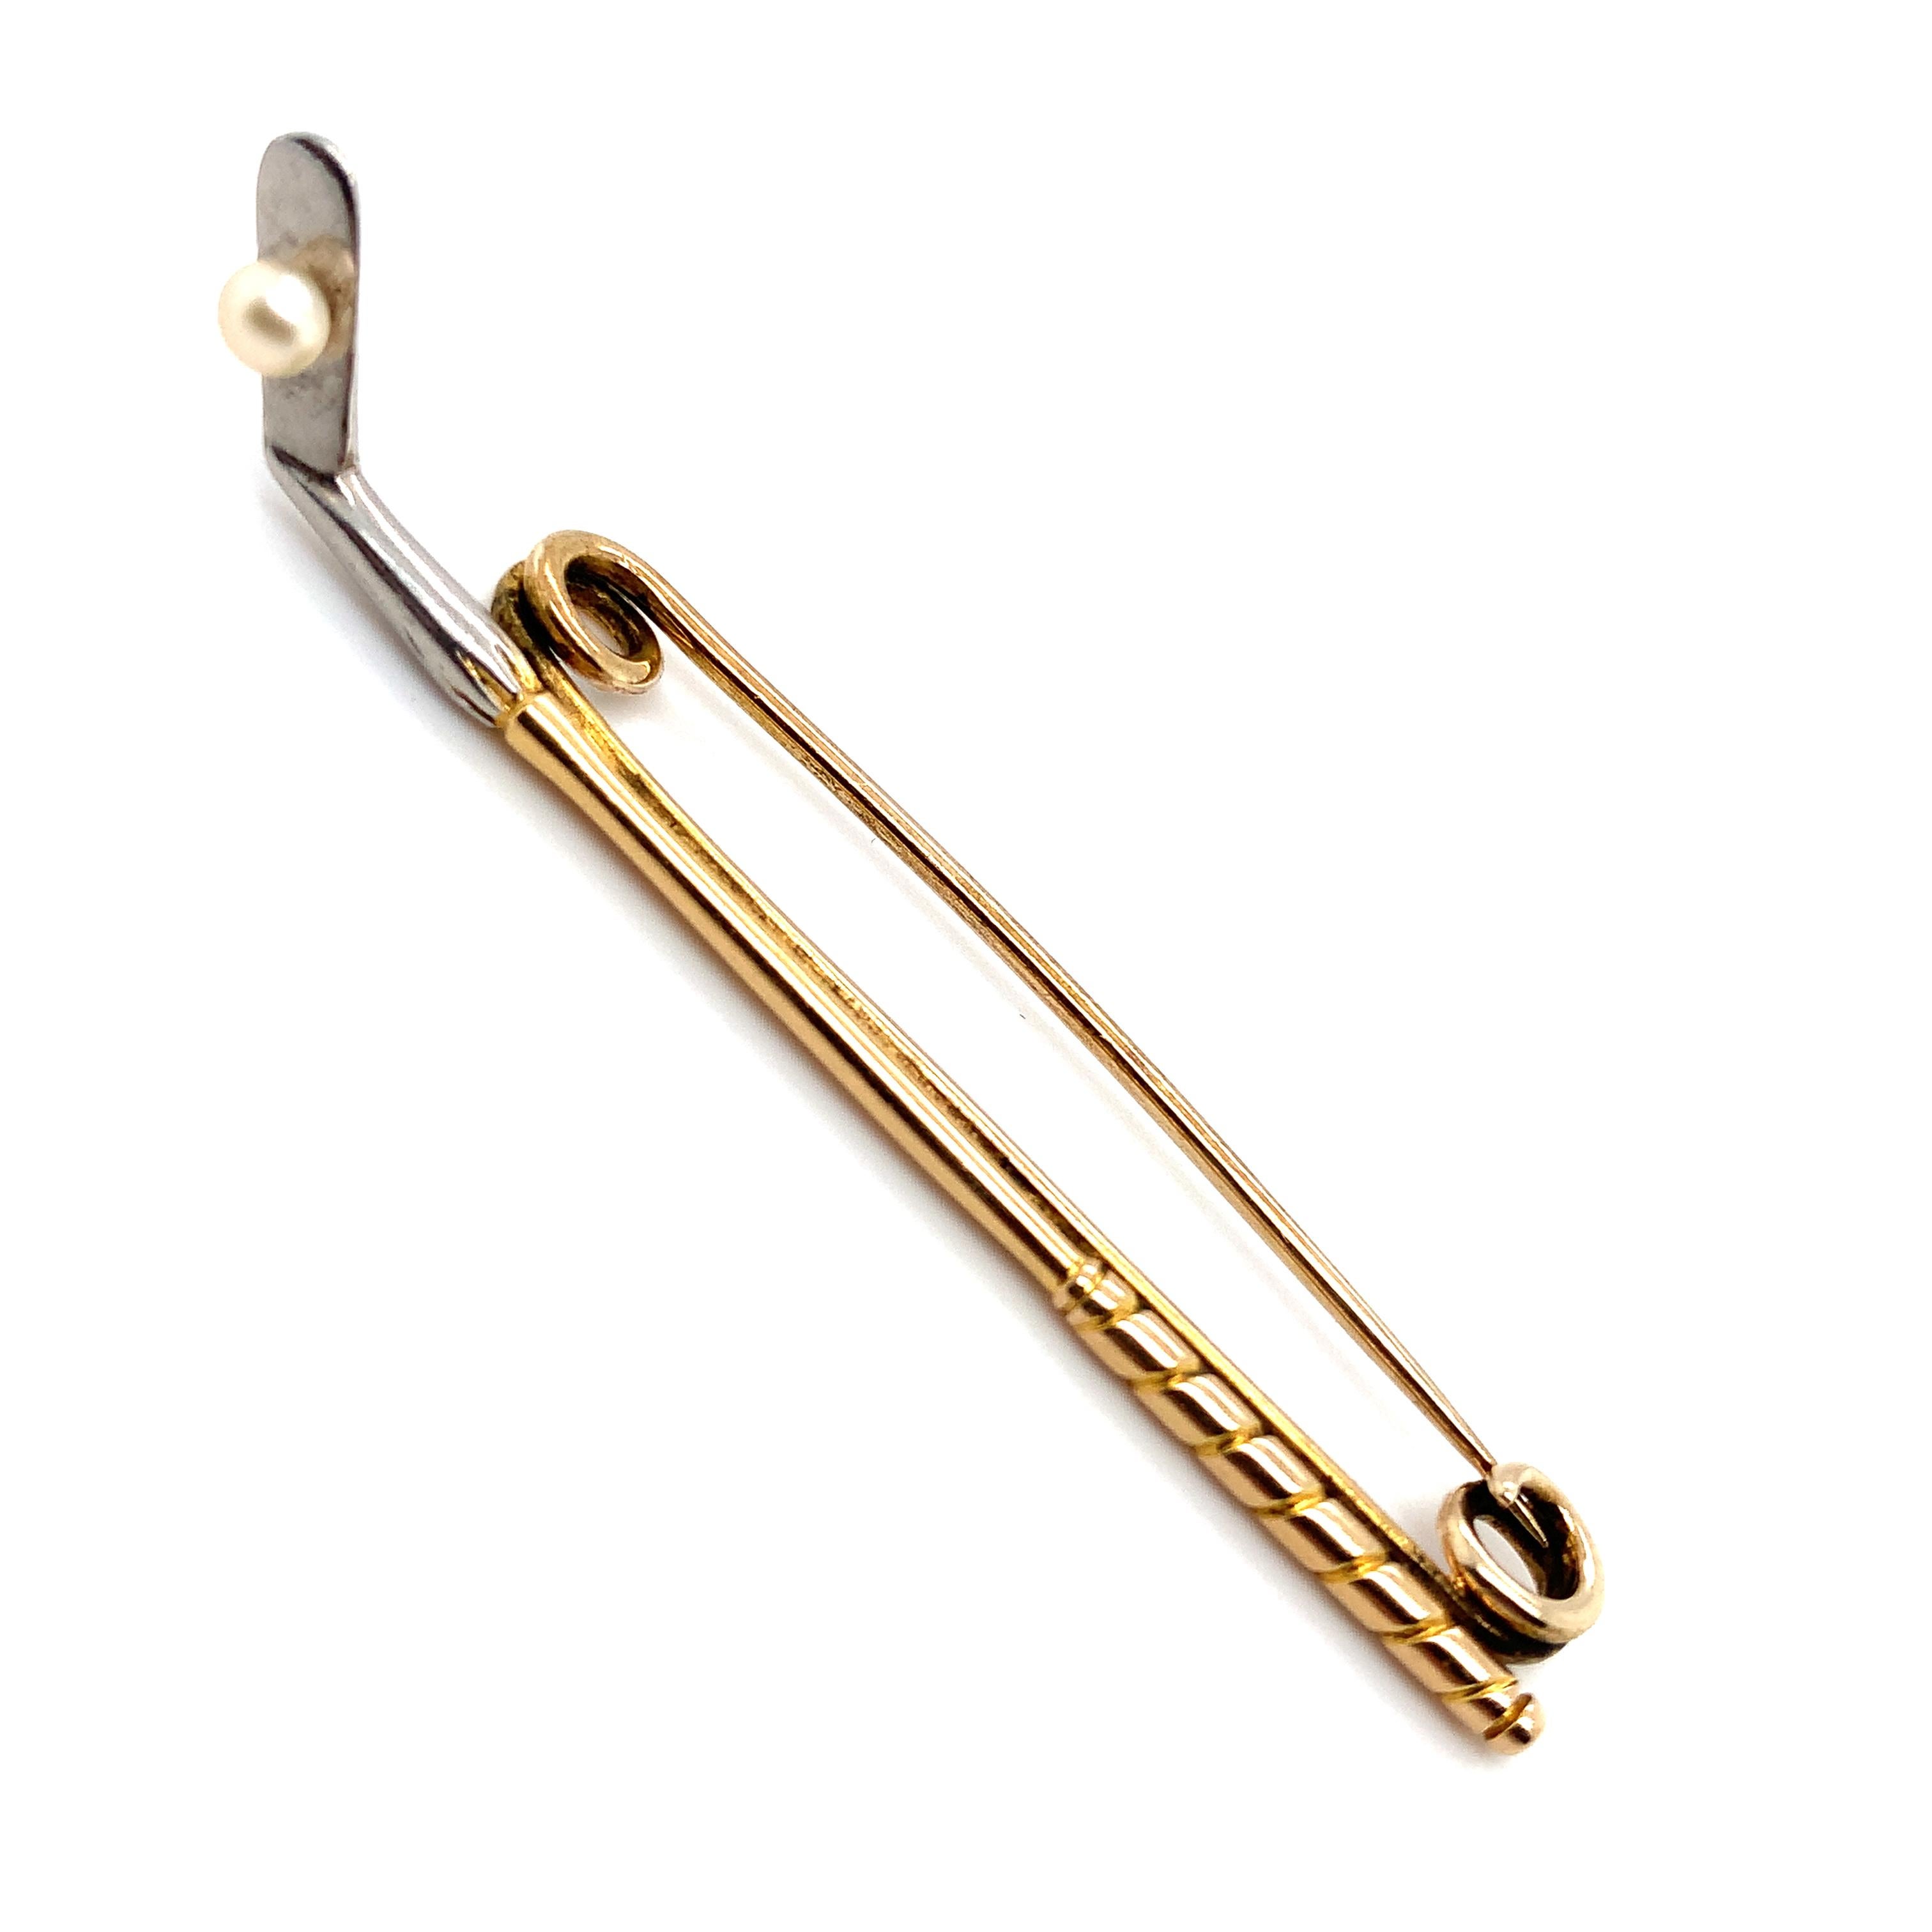 18ct Yellow gold and platinum art deco golf pin brooch with cultured pearl
Cultured pearl round shaped mounted in platinum 
Cultured pearl 3mm white shade
Length 55mm
Weight 3.9 grams
Accompanied by valuation
Beautiful golf pin brooch for golf club